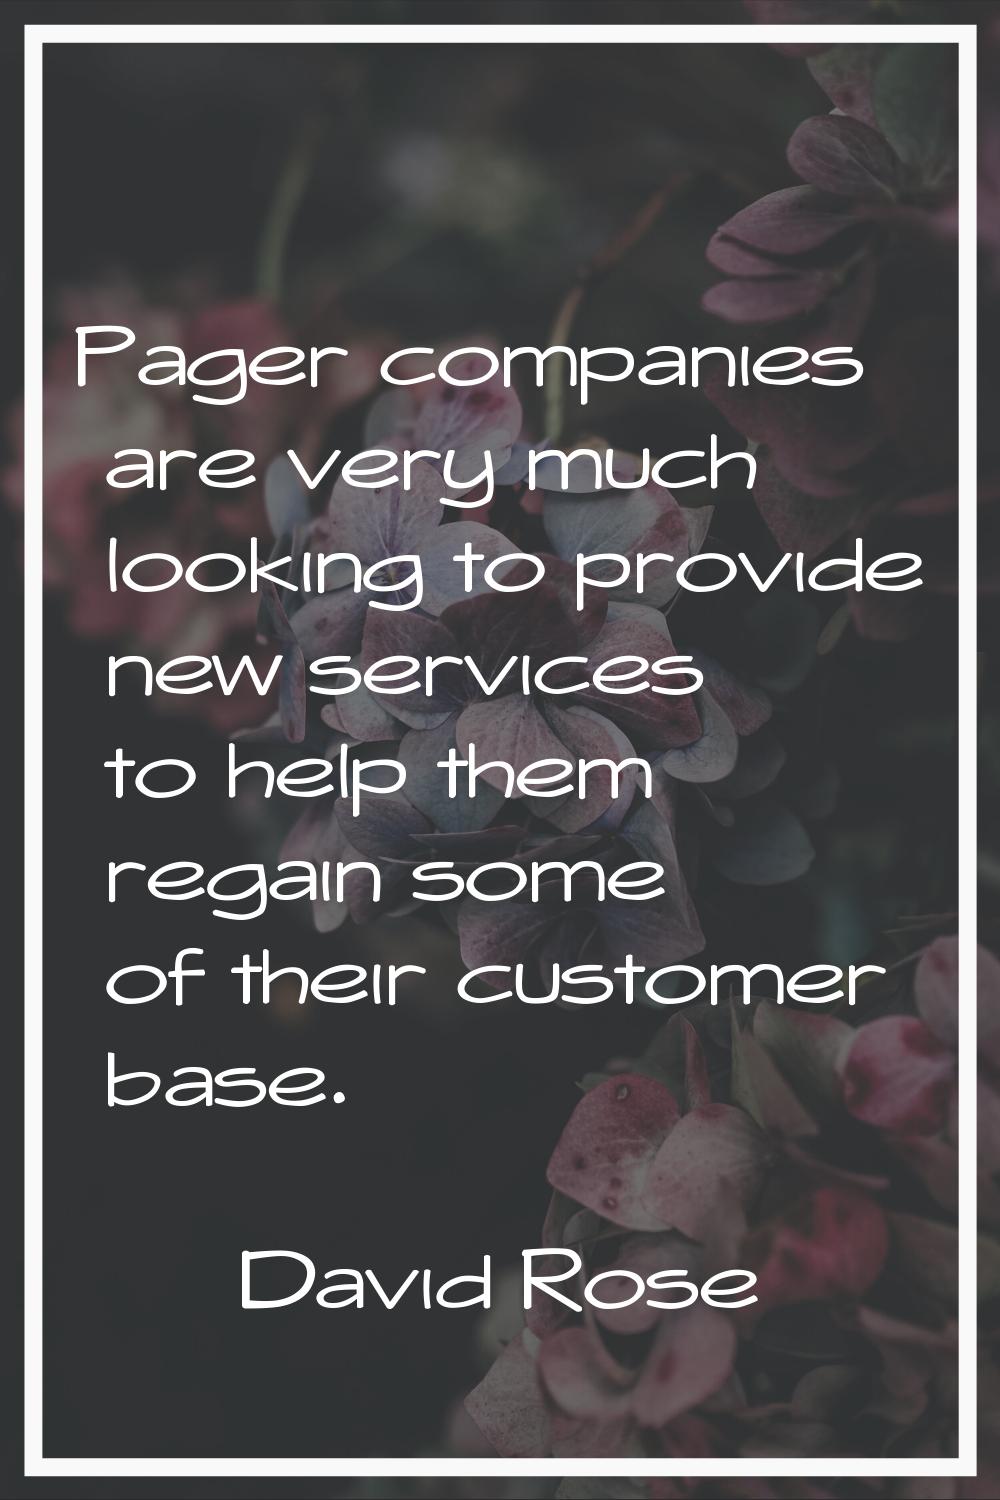 Pager companies are very much looking to provide new services to help them regain some of their cus